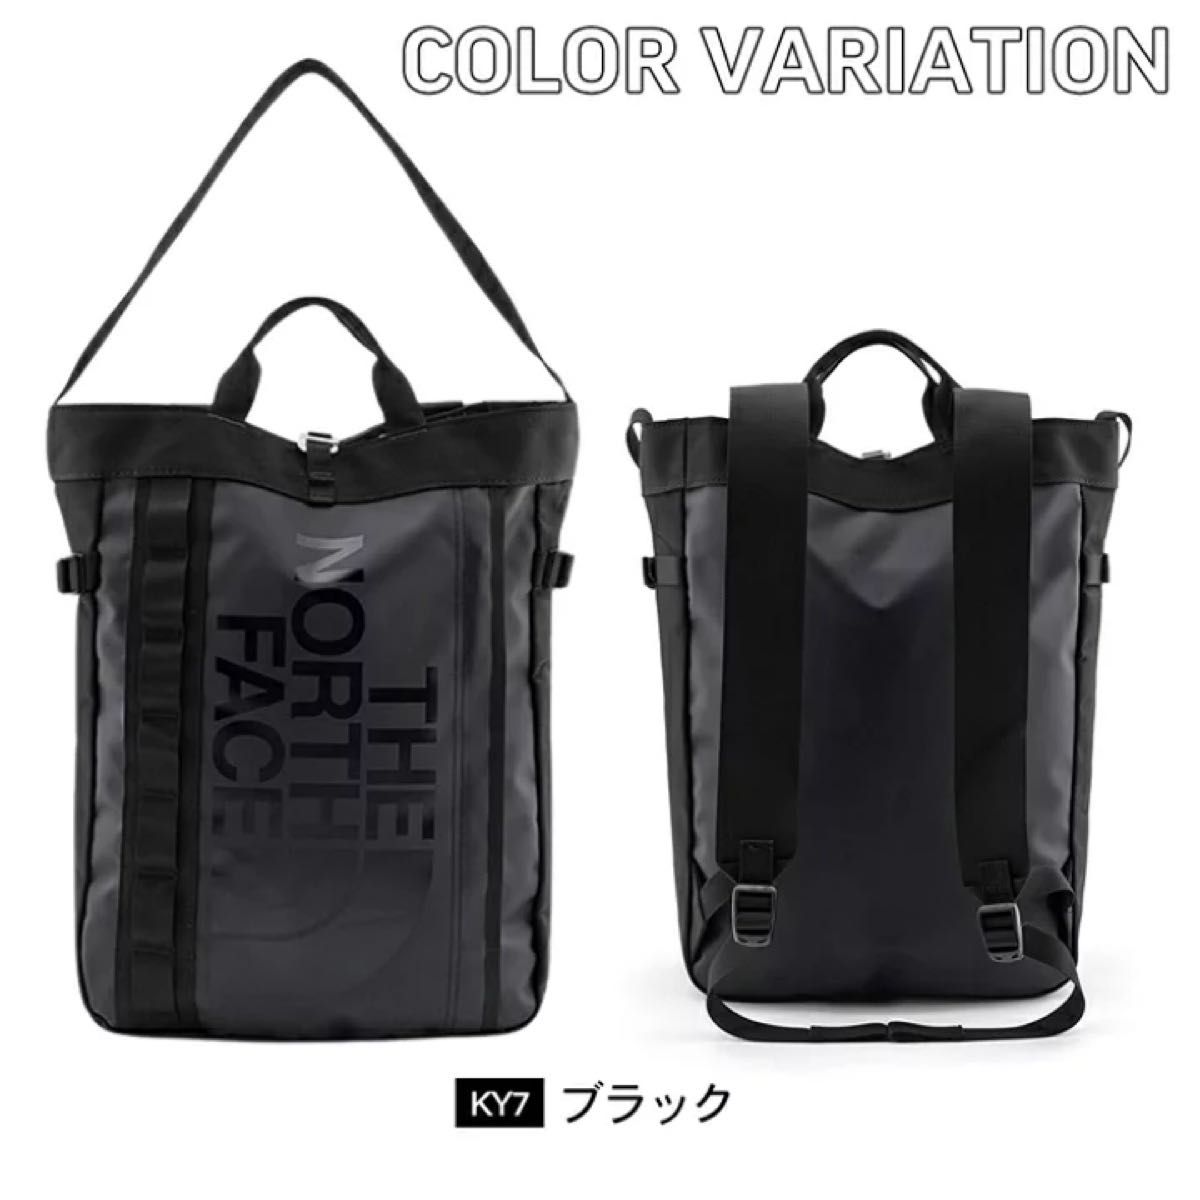 【THE NORTH FACE】ザ・ノースフェイス BASE CAMP TOTE 【トートバッグ】